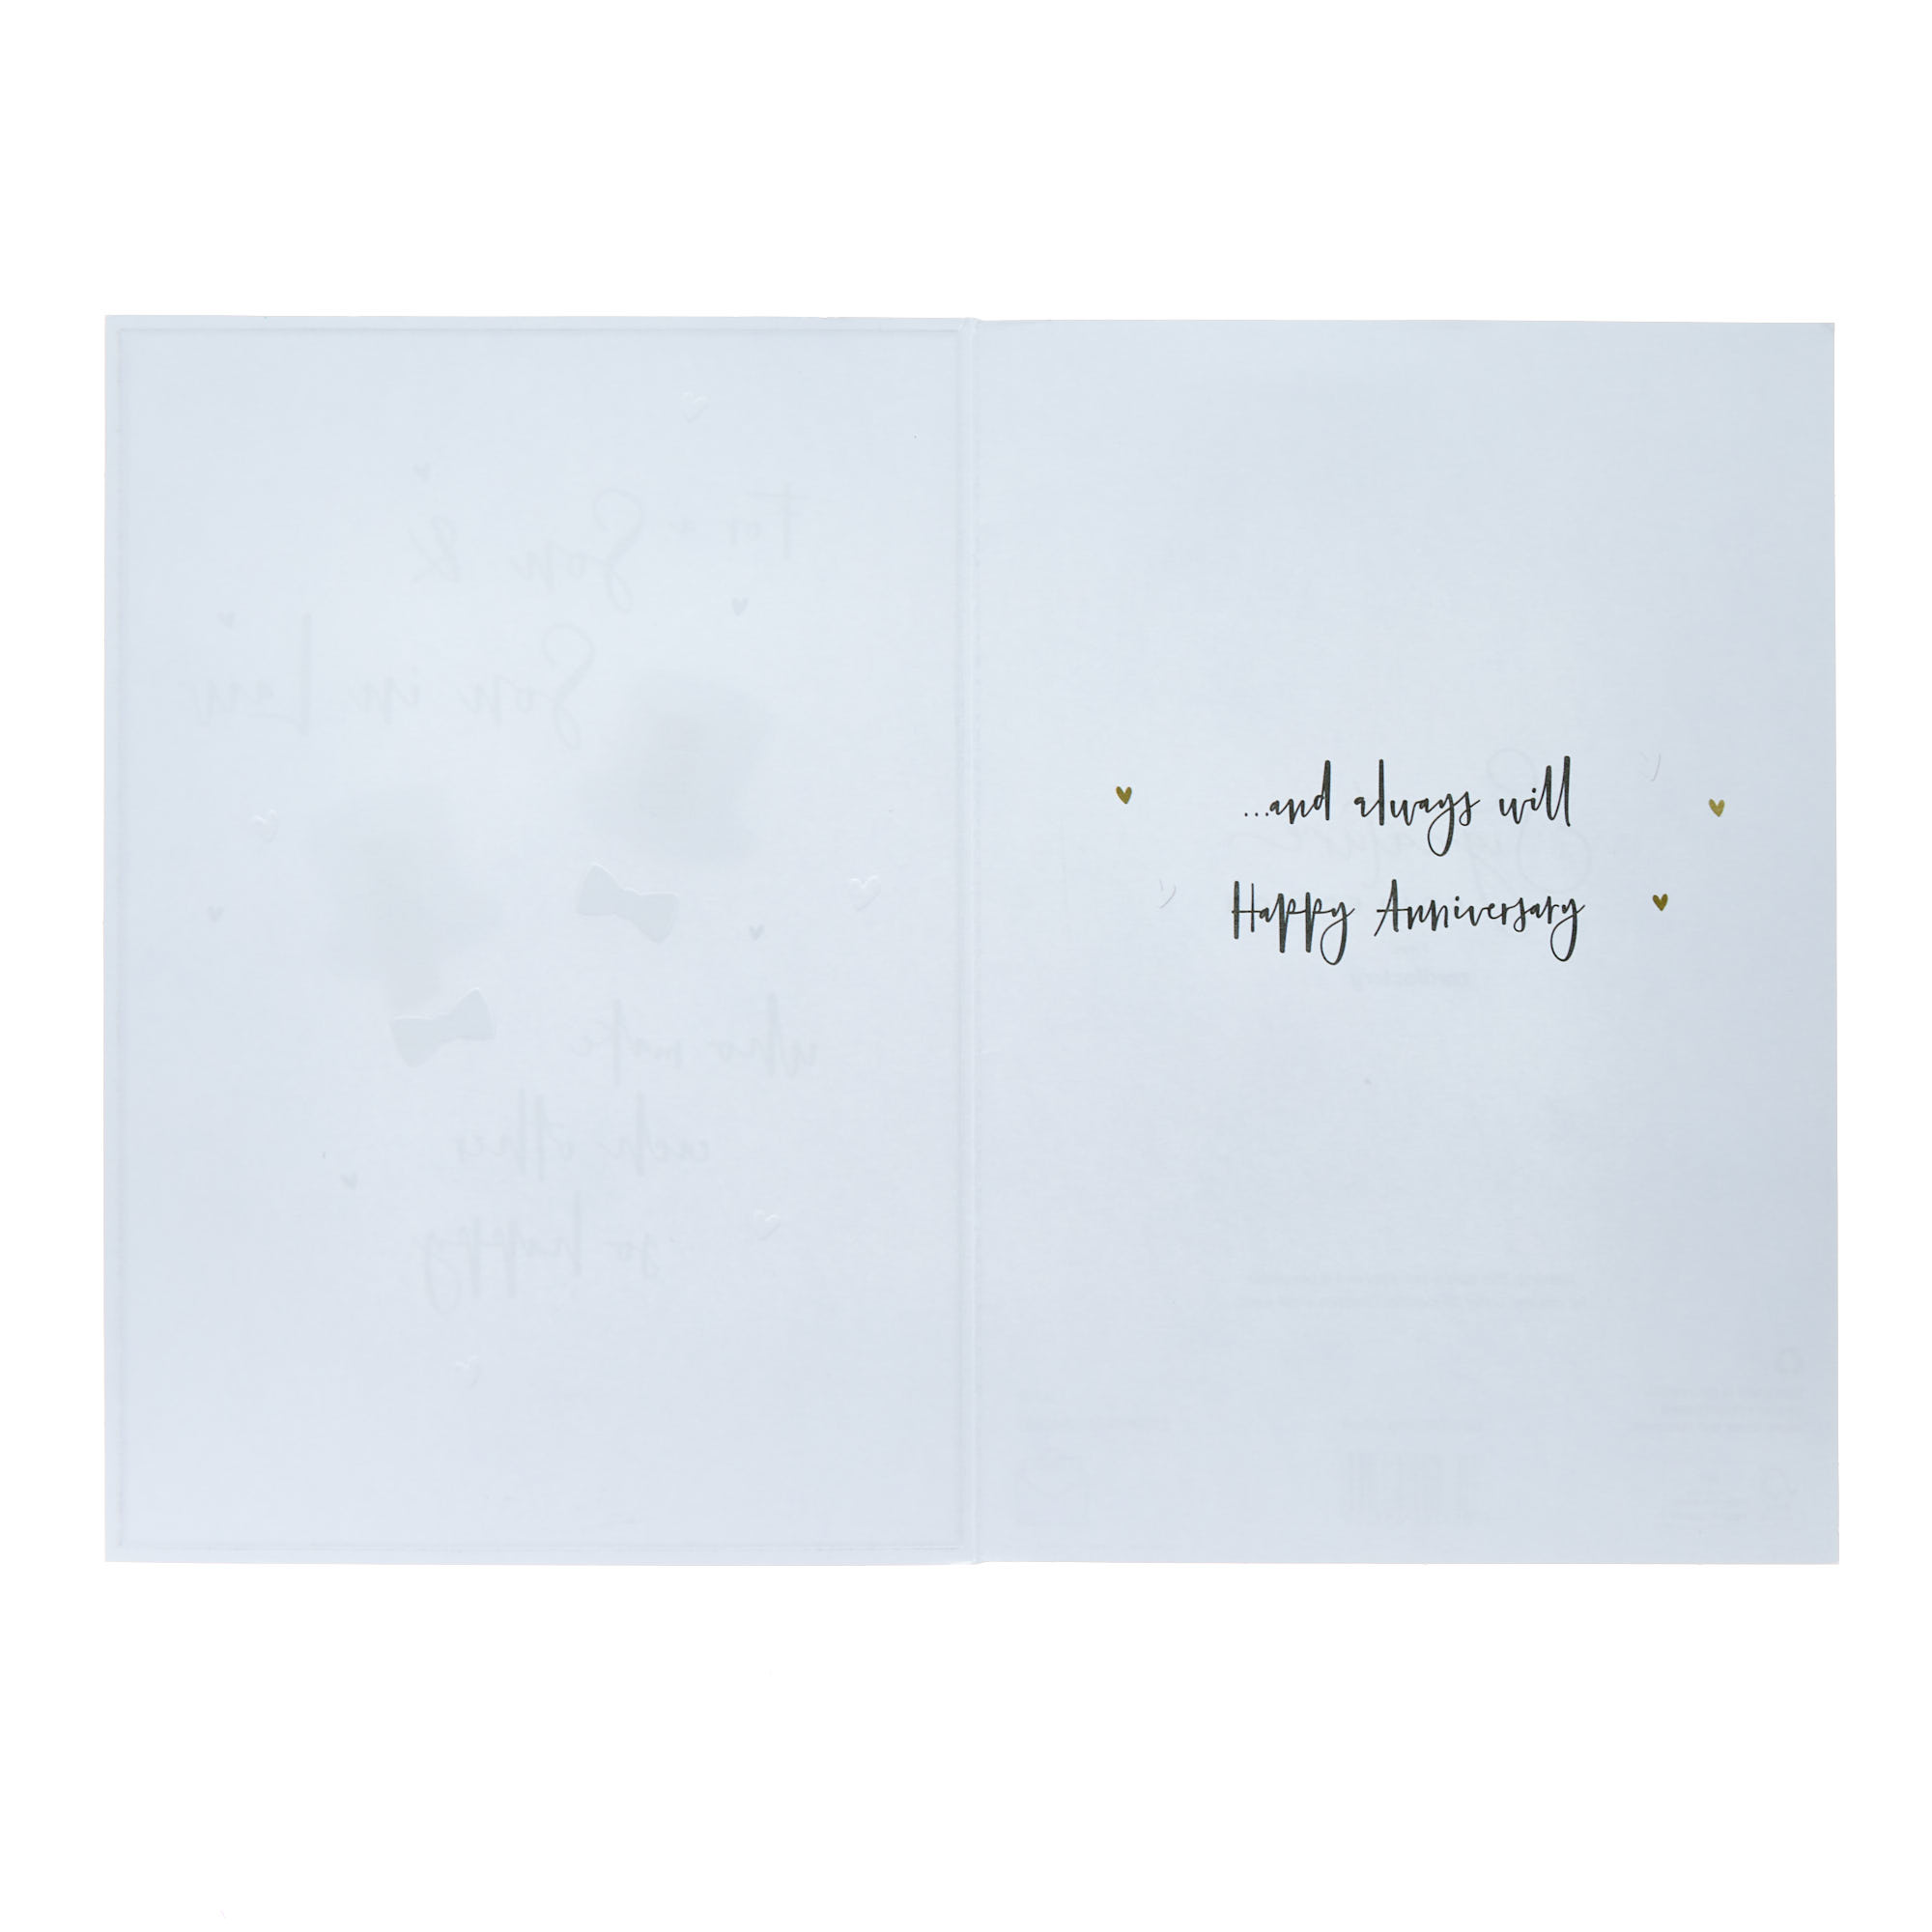 Son & Son In Law Top Hats Wedding Anniversary Card